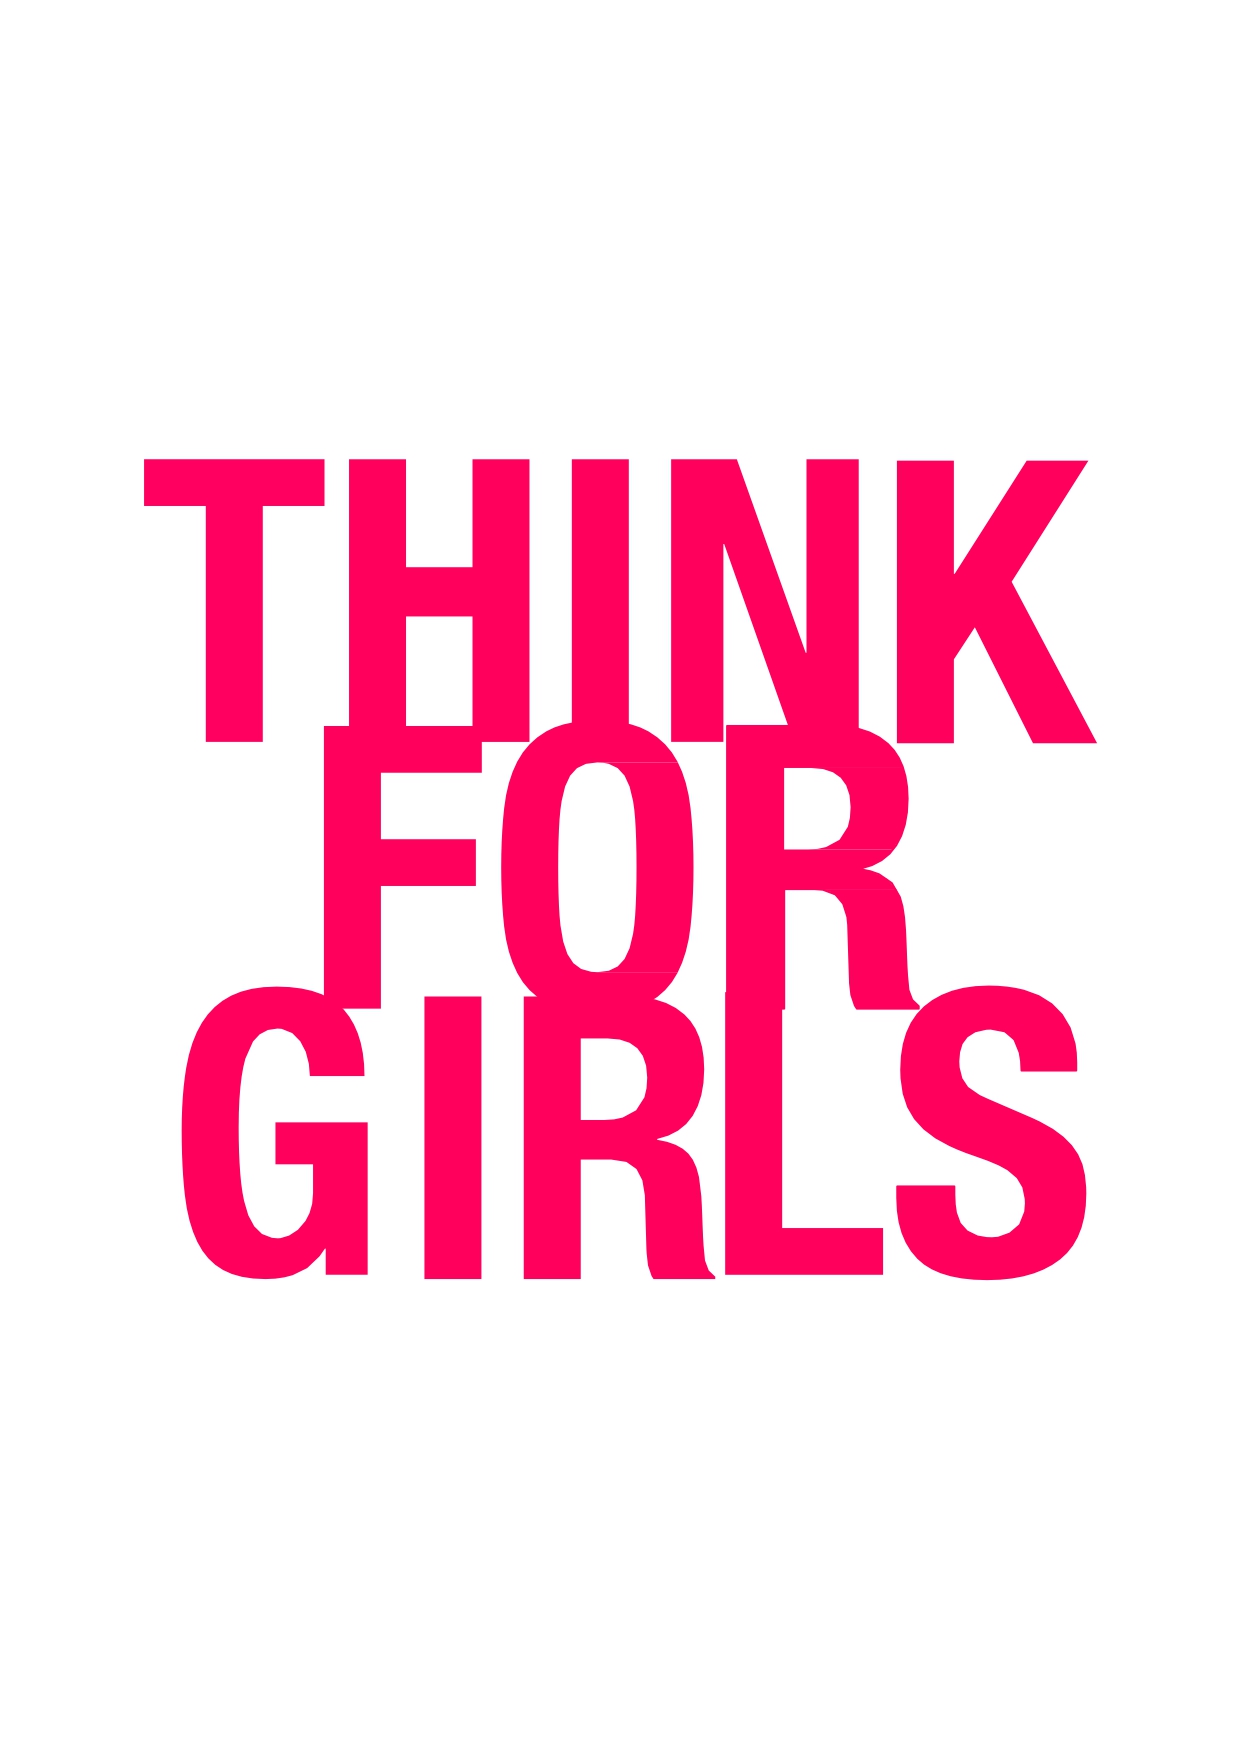 MIC presents ”THINK FOR GIRLS” POP UP WEEK 1